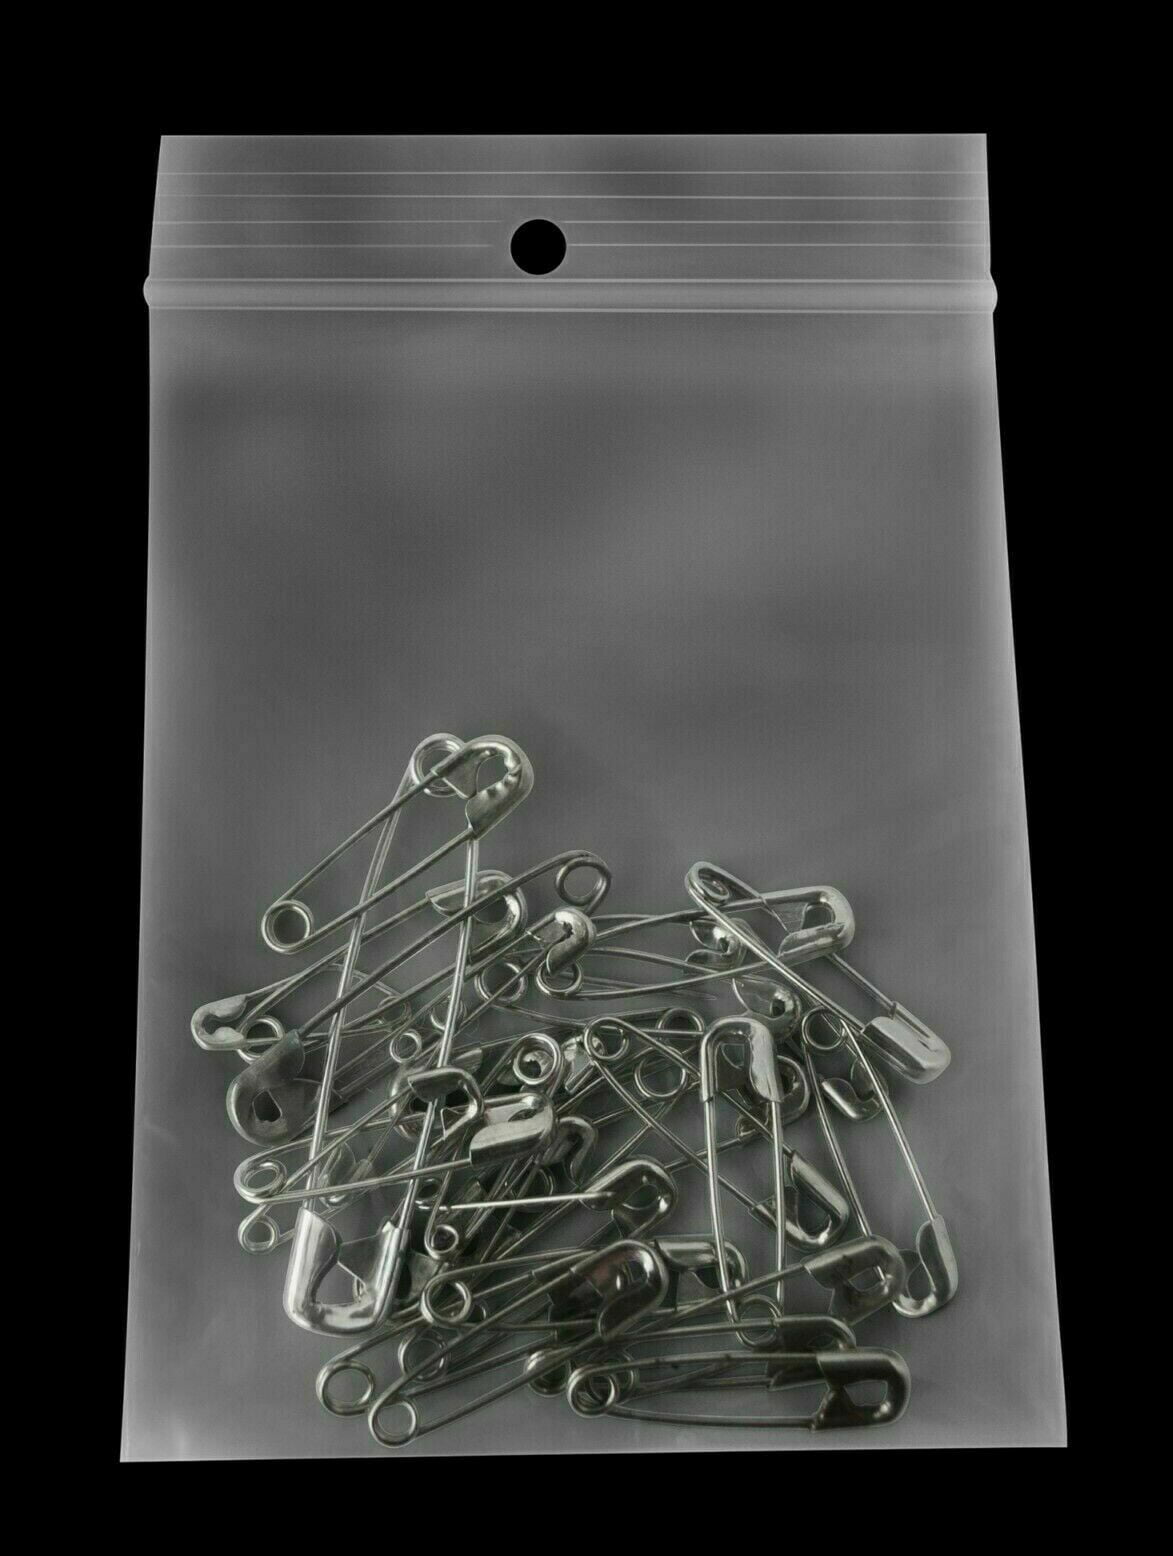 1000 3x5 4mil Reclosable Hang Hole Clear Zip Lock Plastic Cello Bags 3"x5" inch 